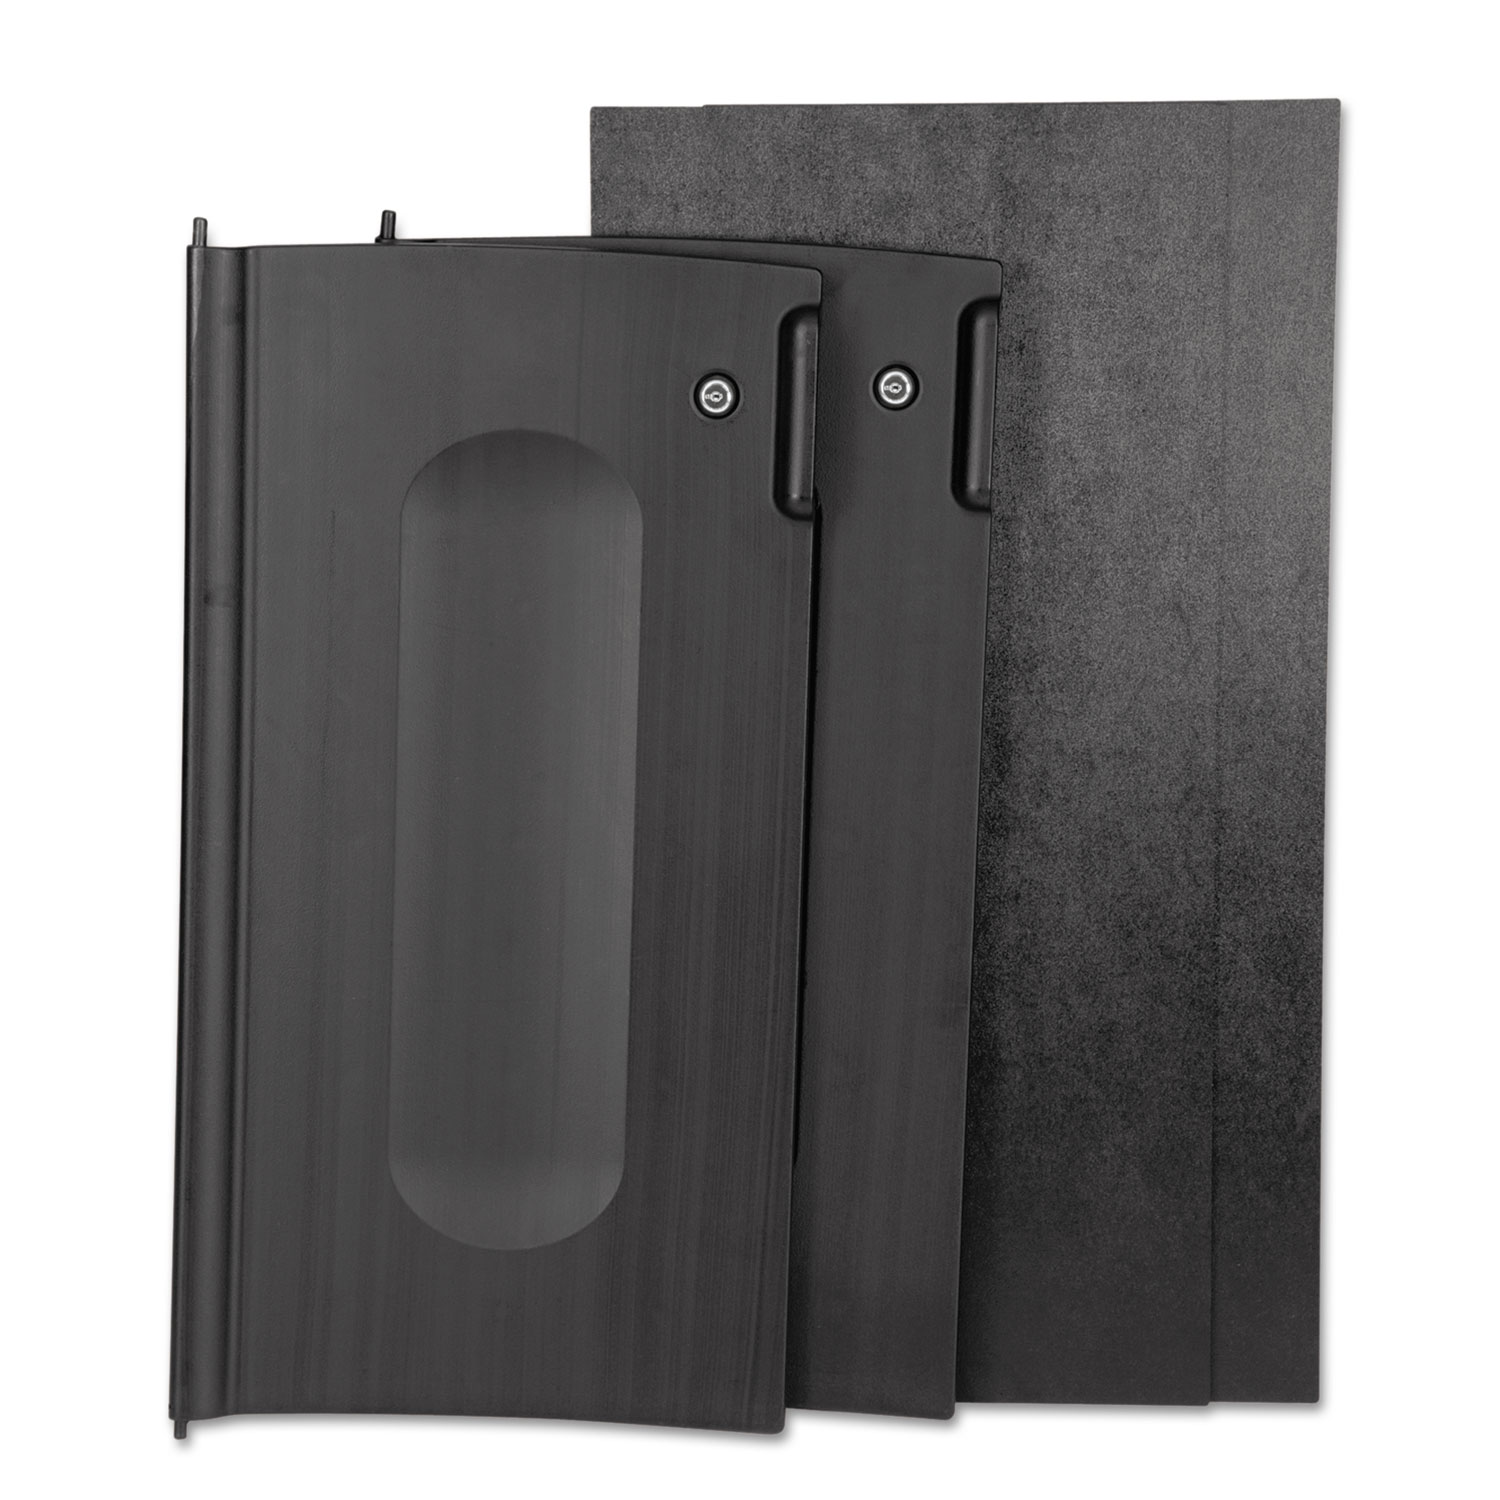 Locking Cabinet Door Kit, For Use With RCP Cleaning Carts, Black